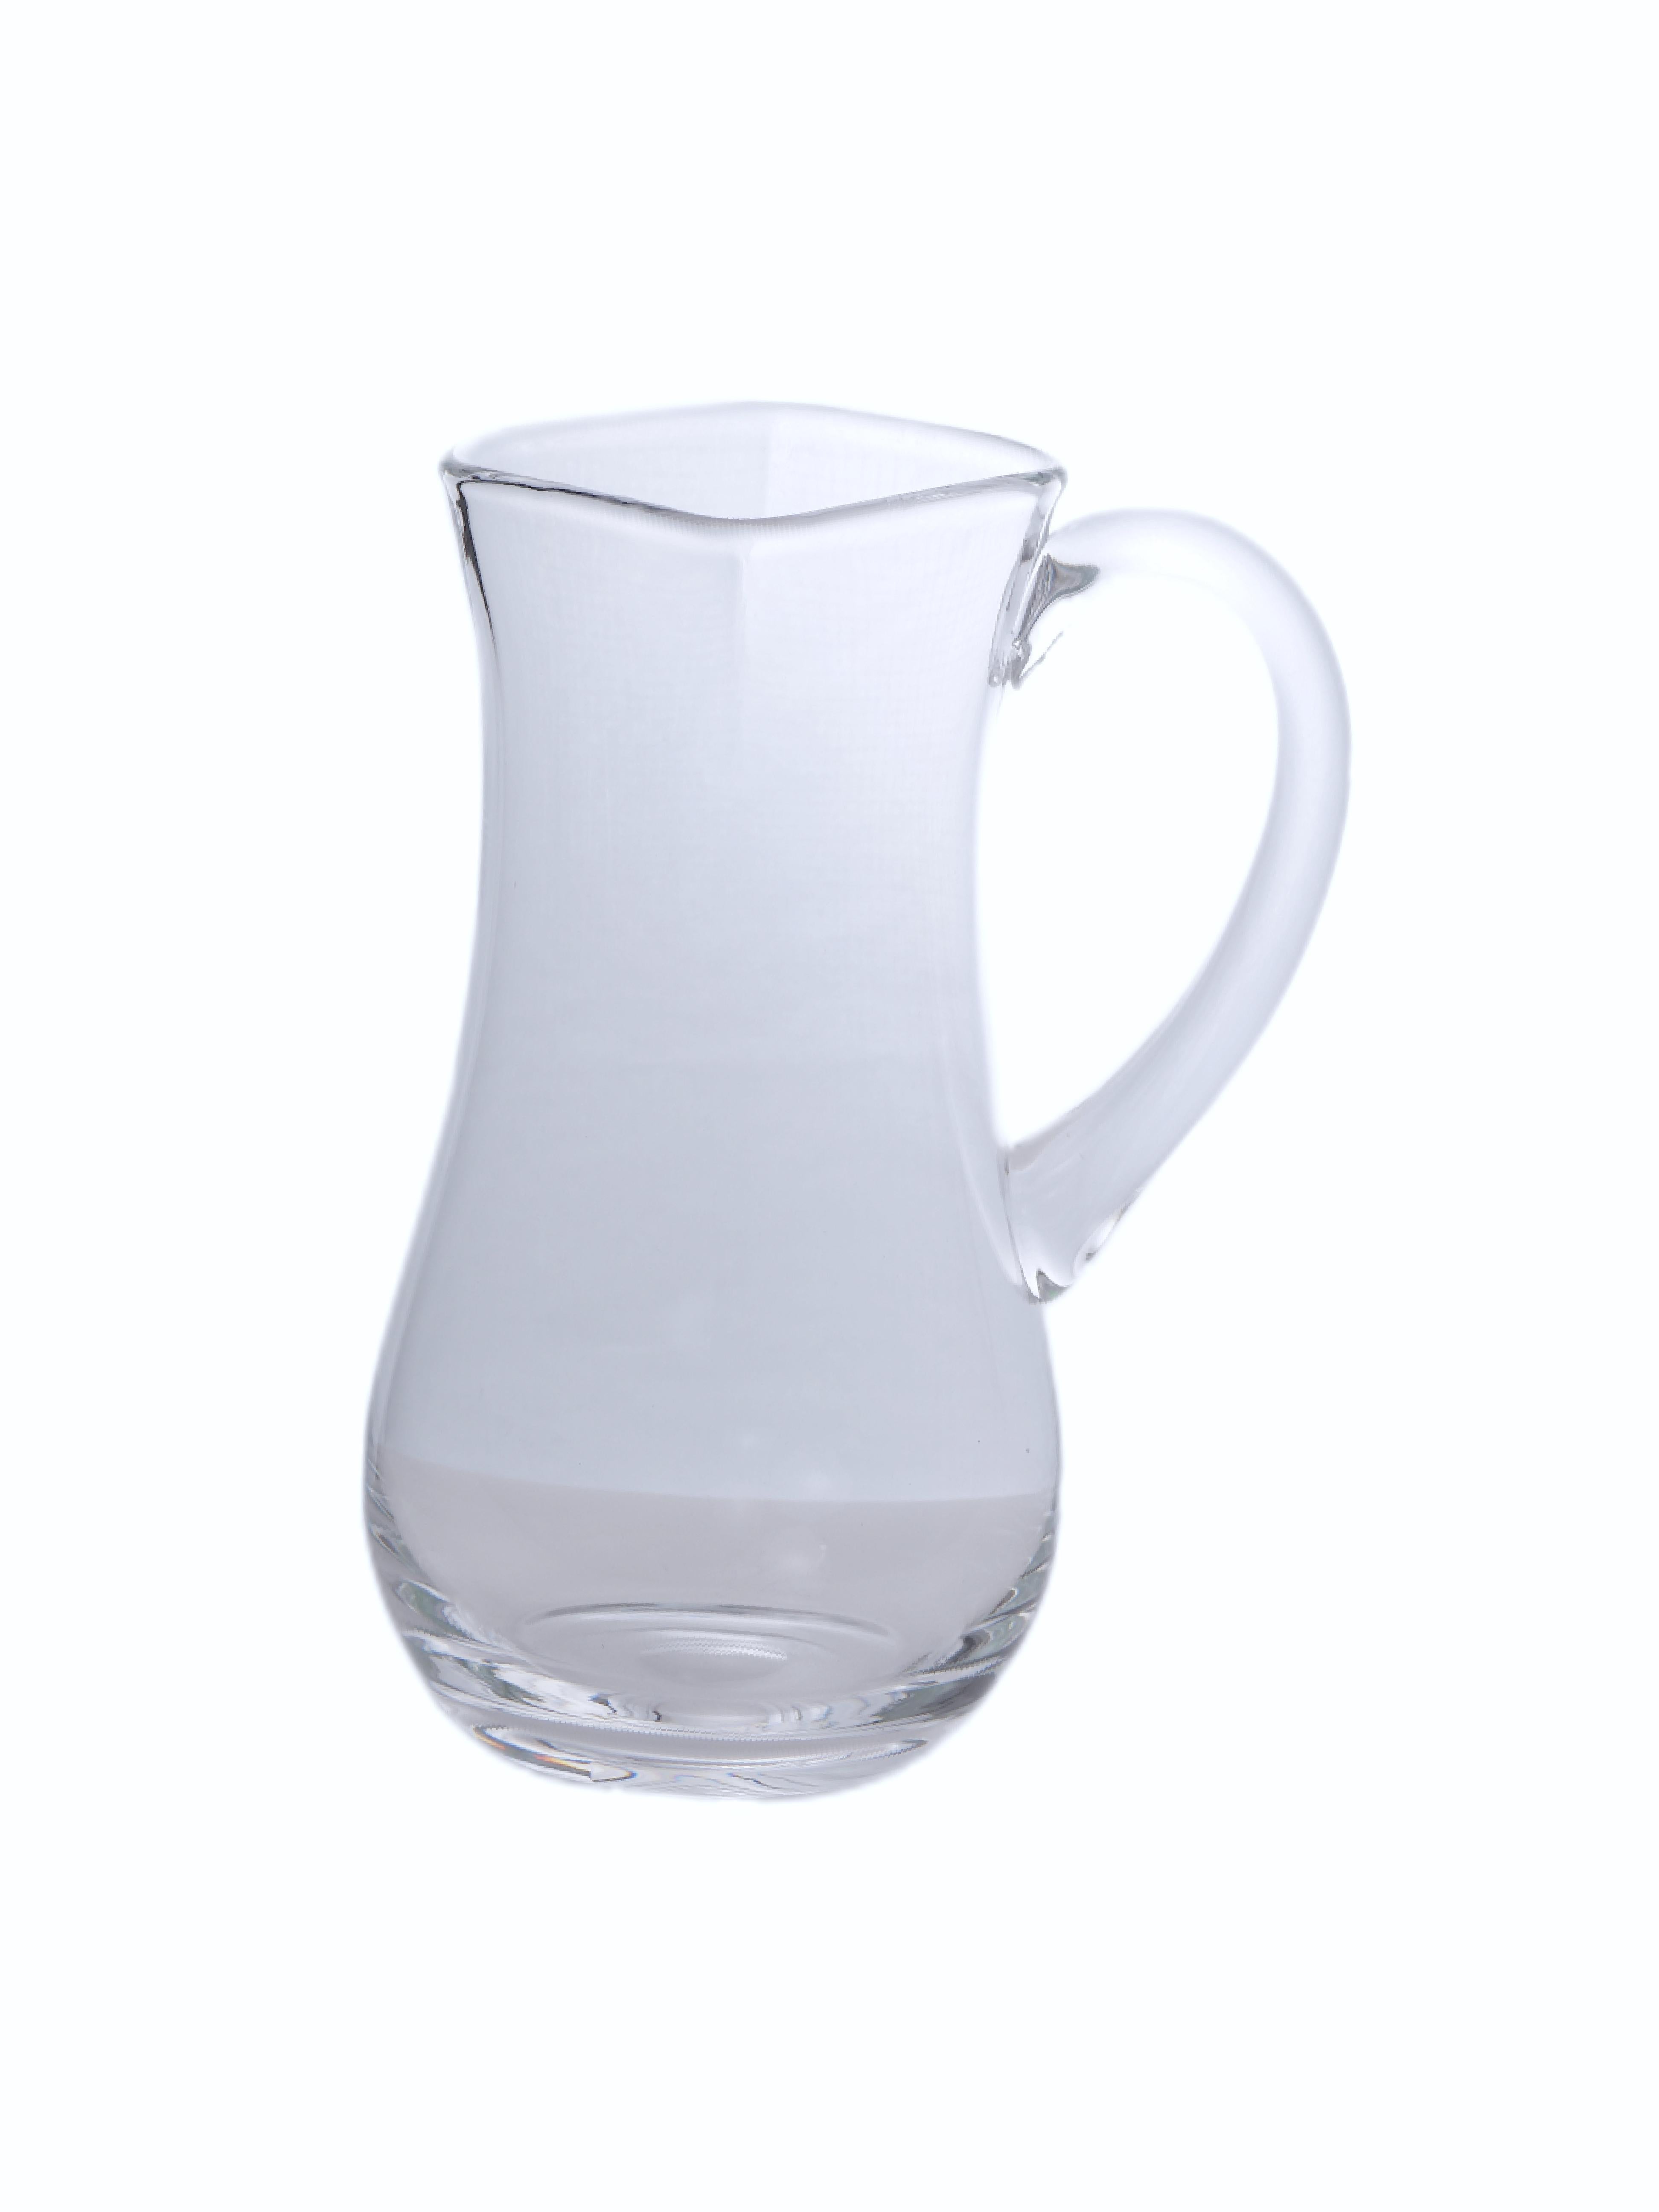 Experience the allure of Mid-Century Modern elegance with this exceptional Crystal Barware/Tableware Serving Pitcher by Movado. Meticulously crafted, this pitcher embodies both function and style, reflecting the brand's legacy of exceptional design.